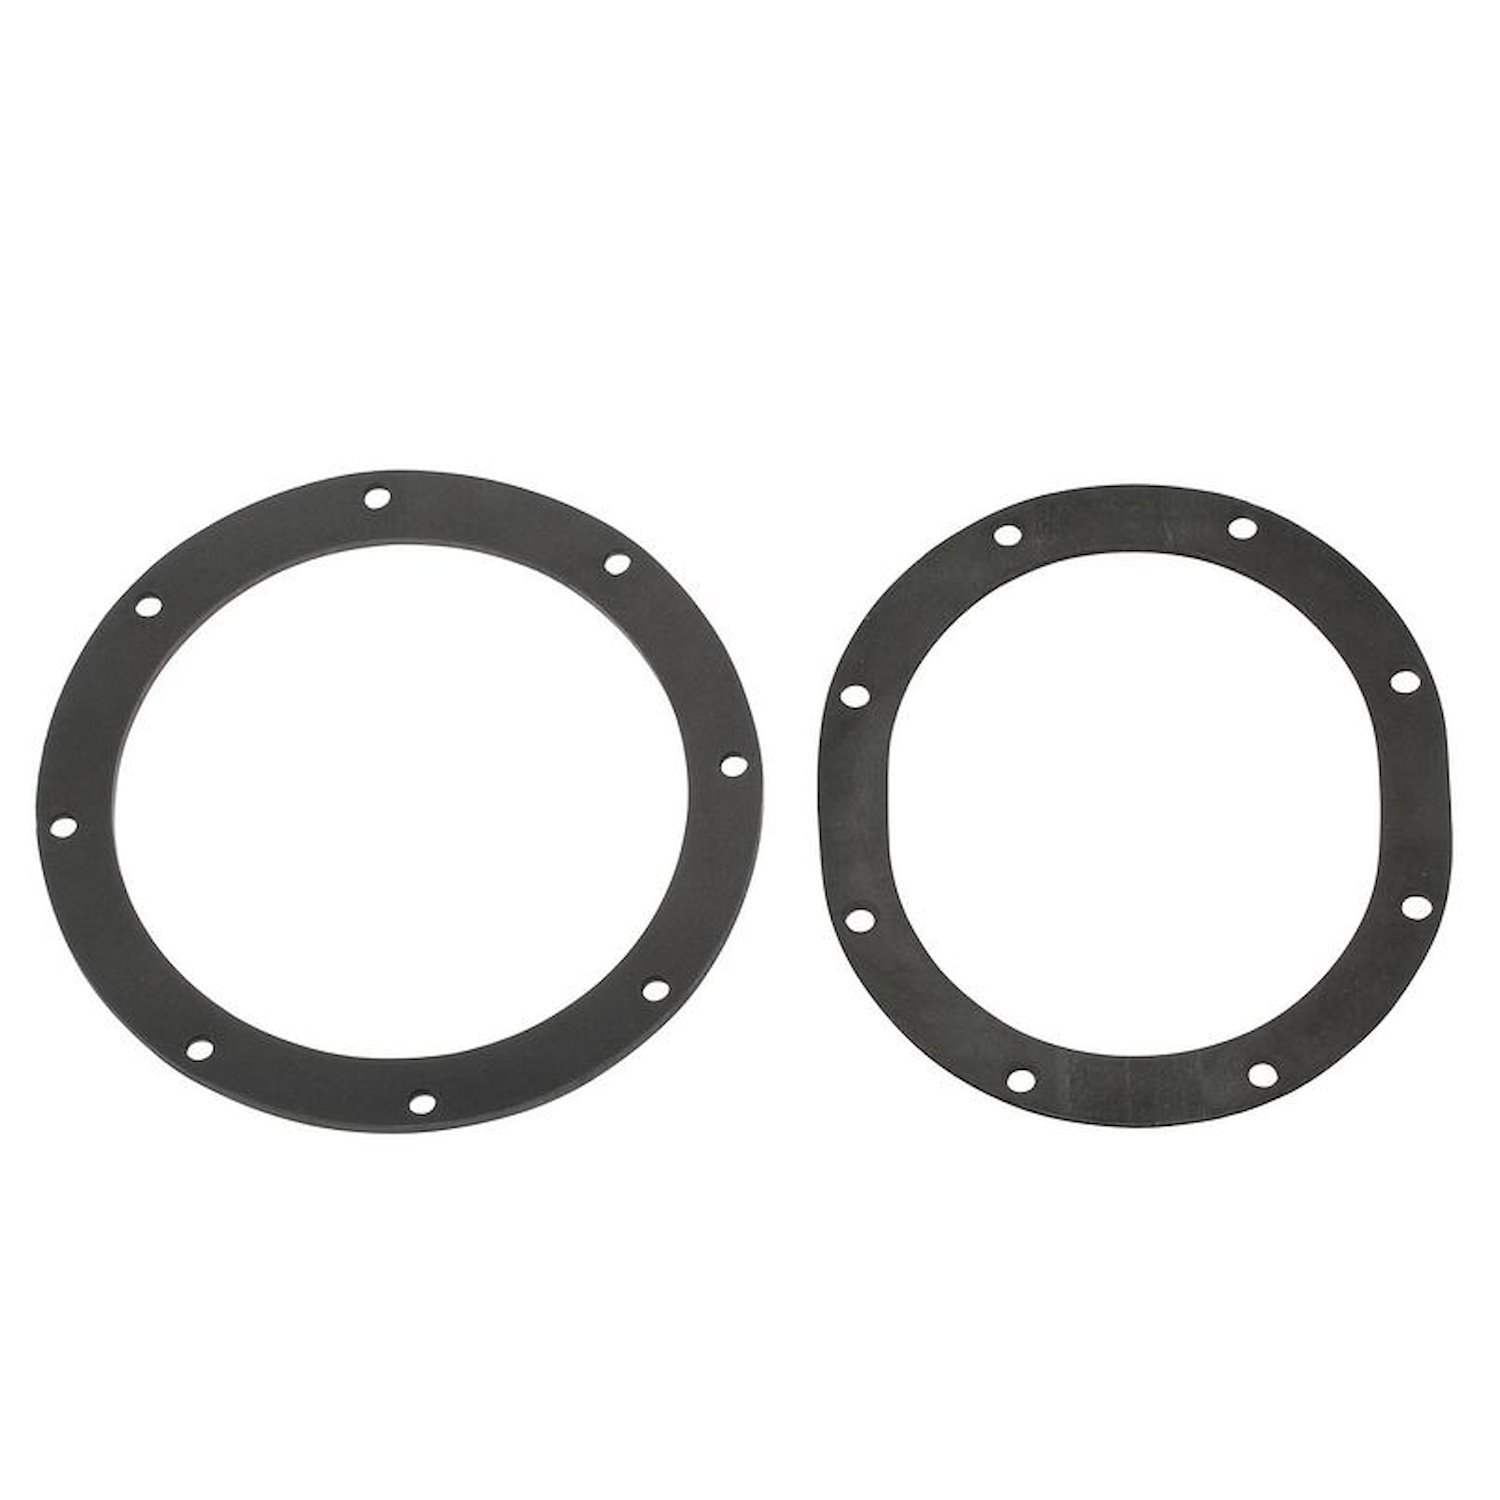 Fuel Pump Tank Seal for Multiple Makes